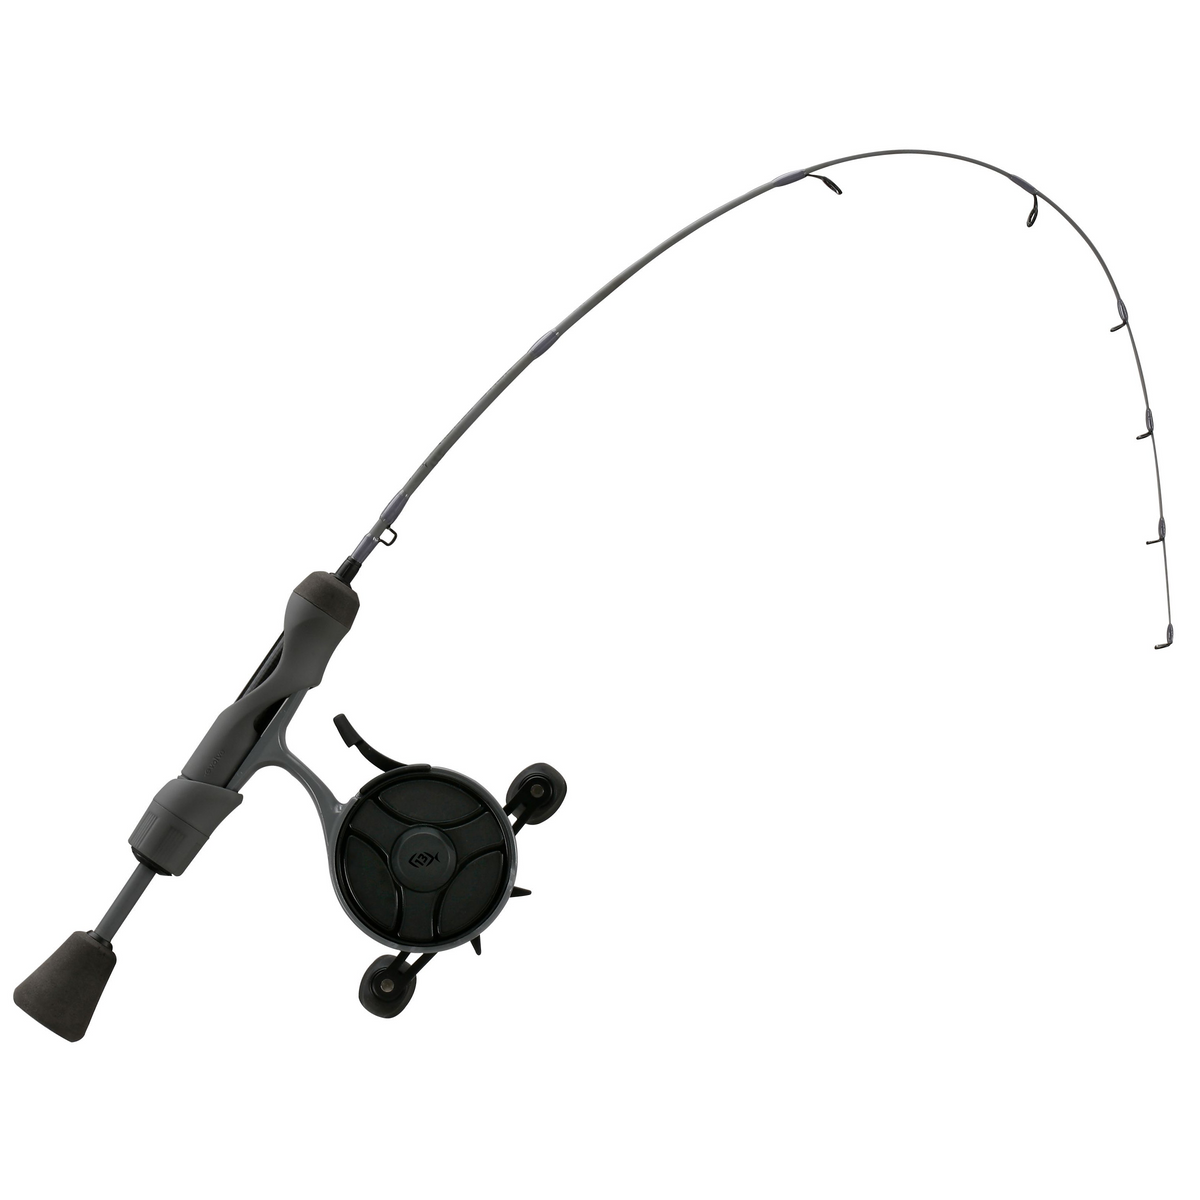 13 Fishing Tickle Stick Review 2023